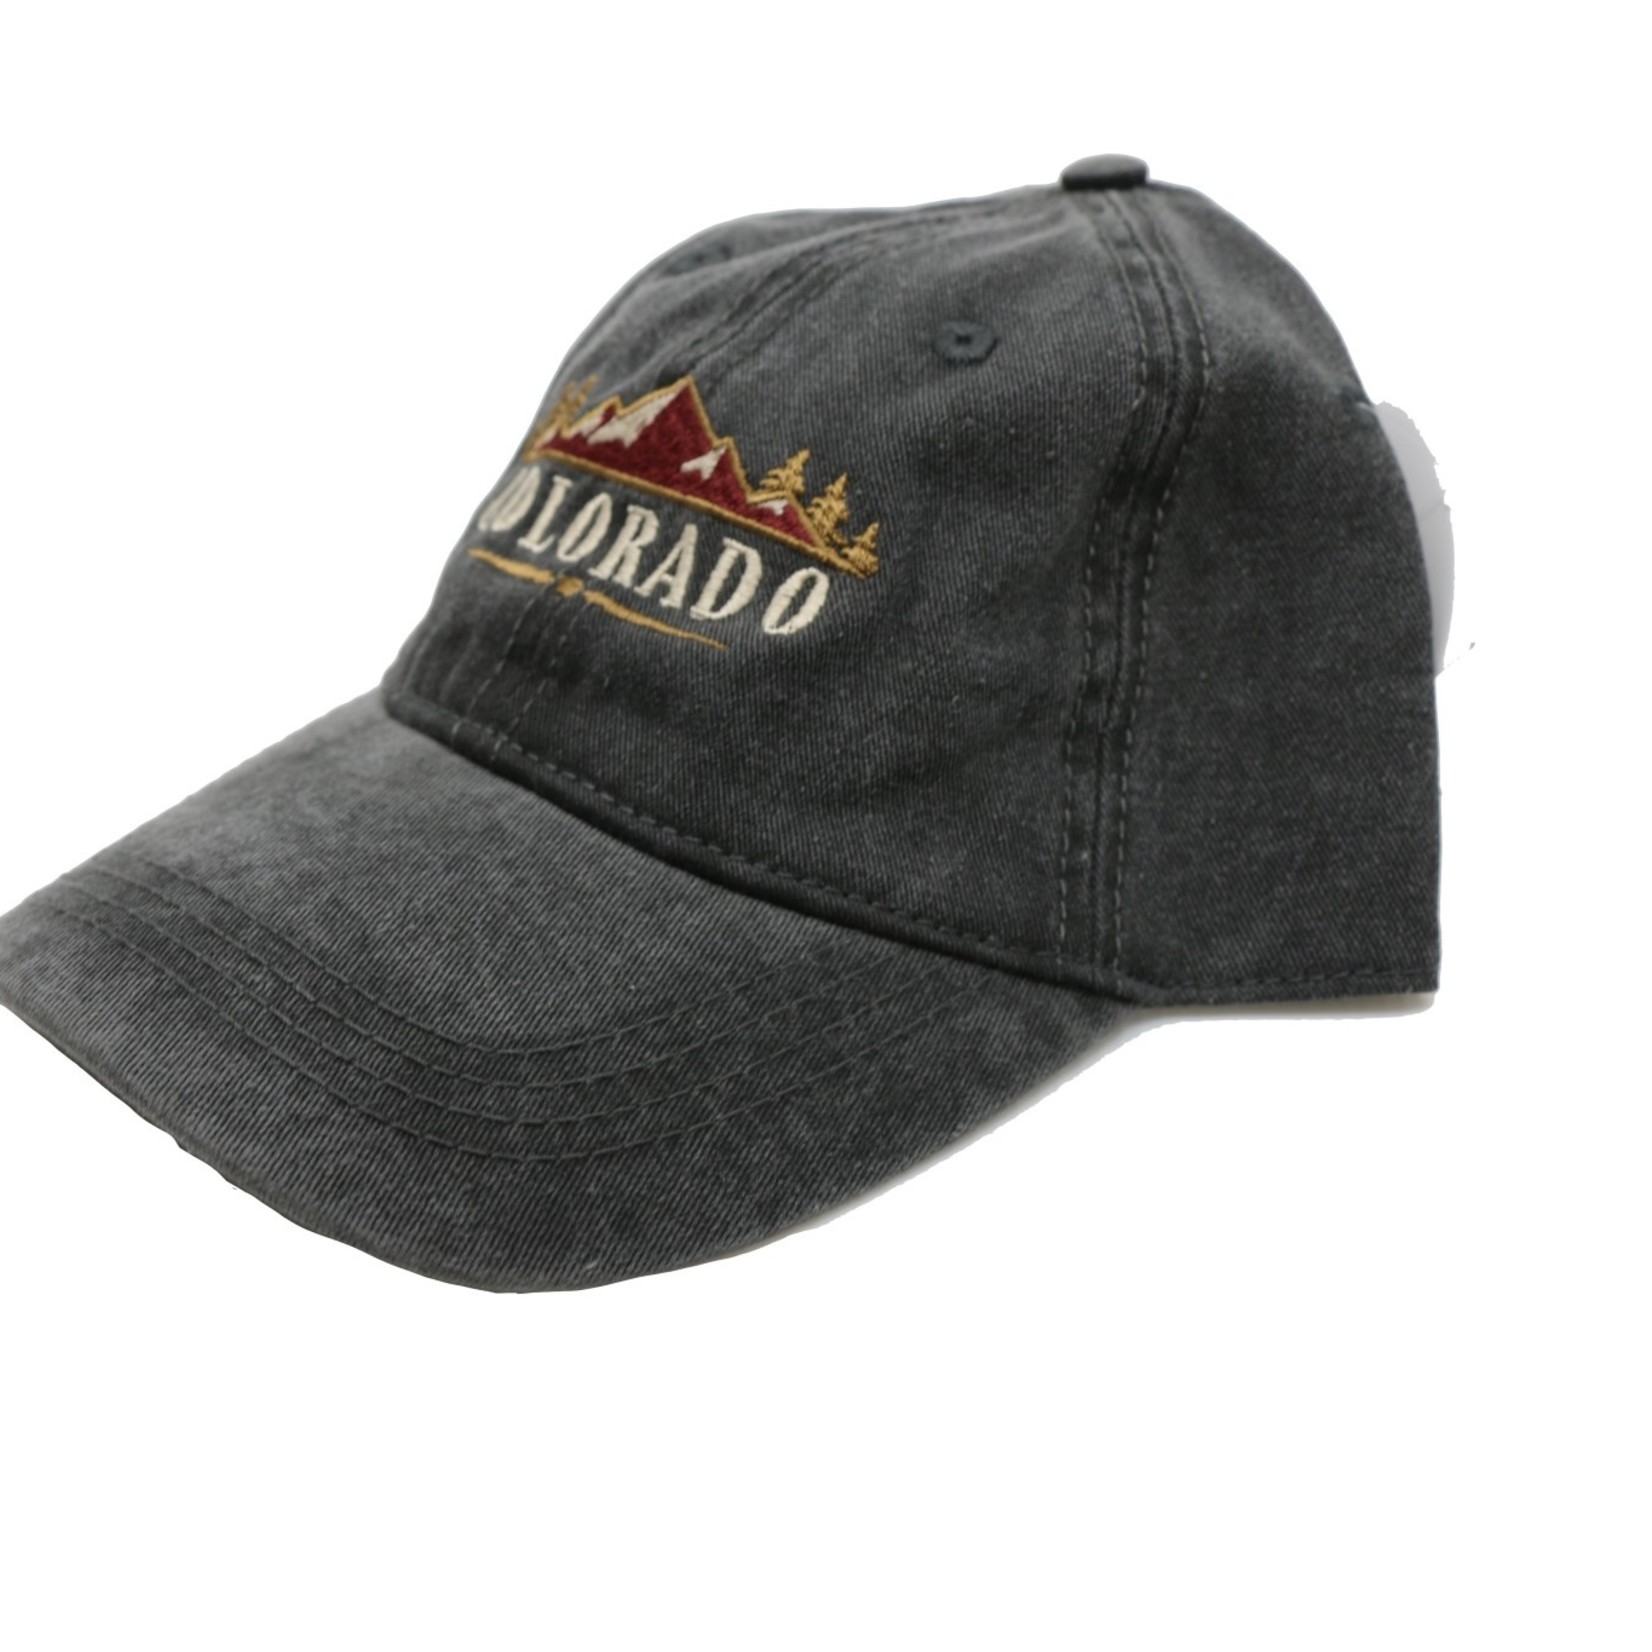 Prairie Mtn Screening Heavy Wash Cotton Embroidered Colorado Cap - Charcoal